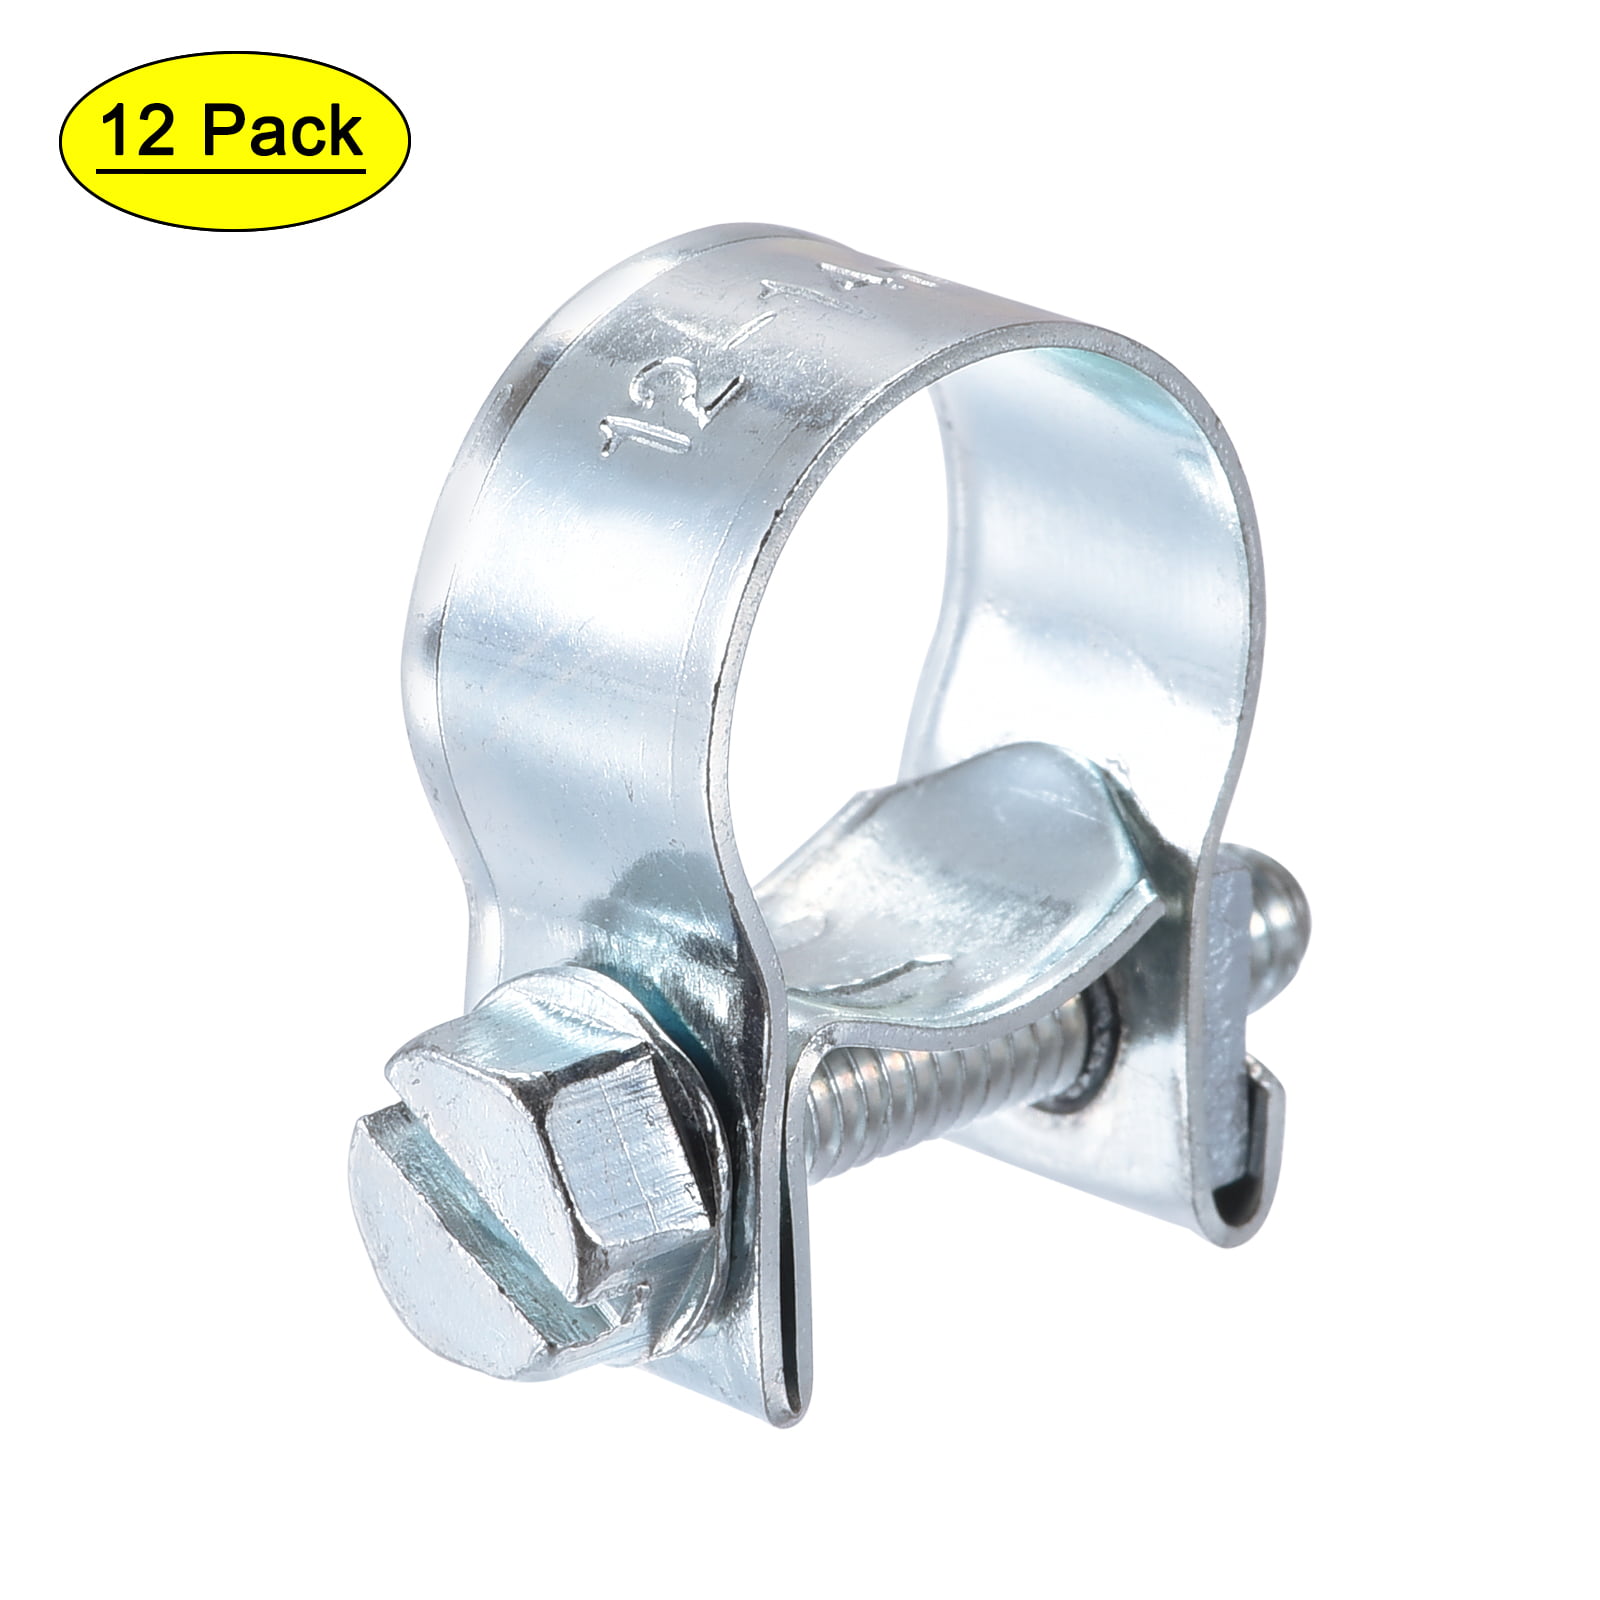 12Pc Assorted SMALL MEDIUM LARGE Hose Clamp Set Rust Resistant Zinc Plated PIPE 